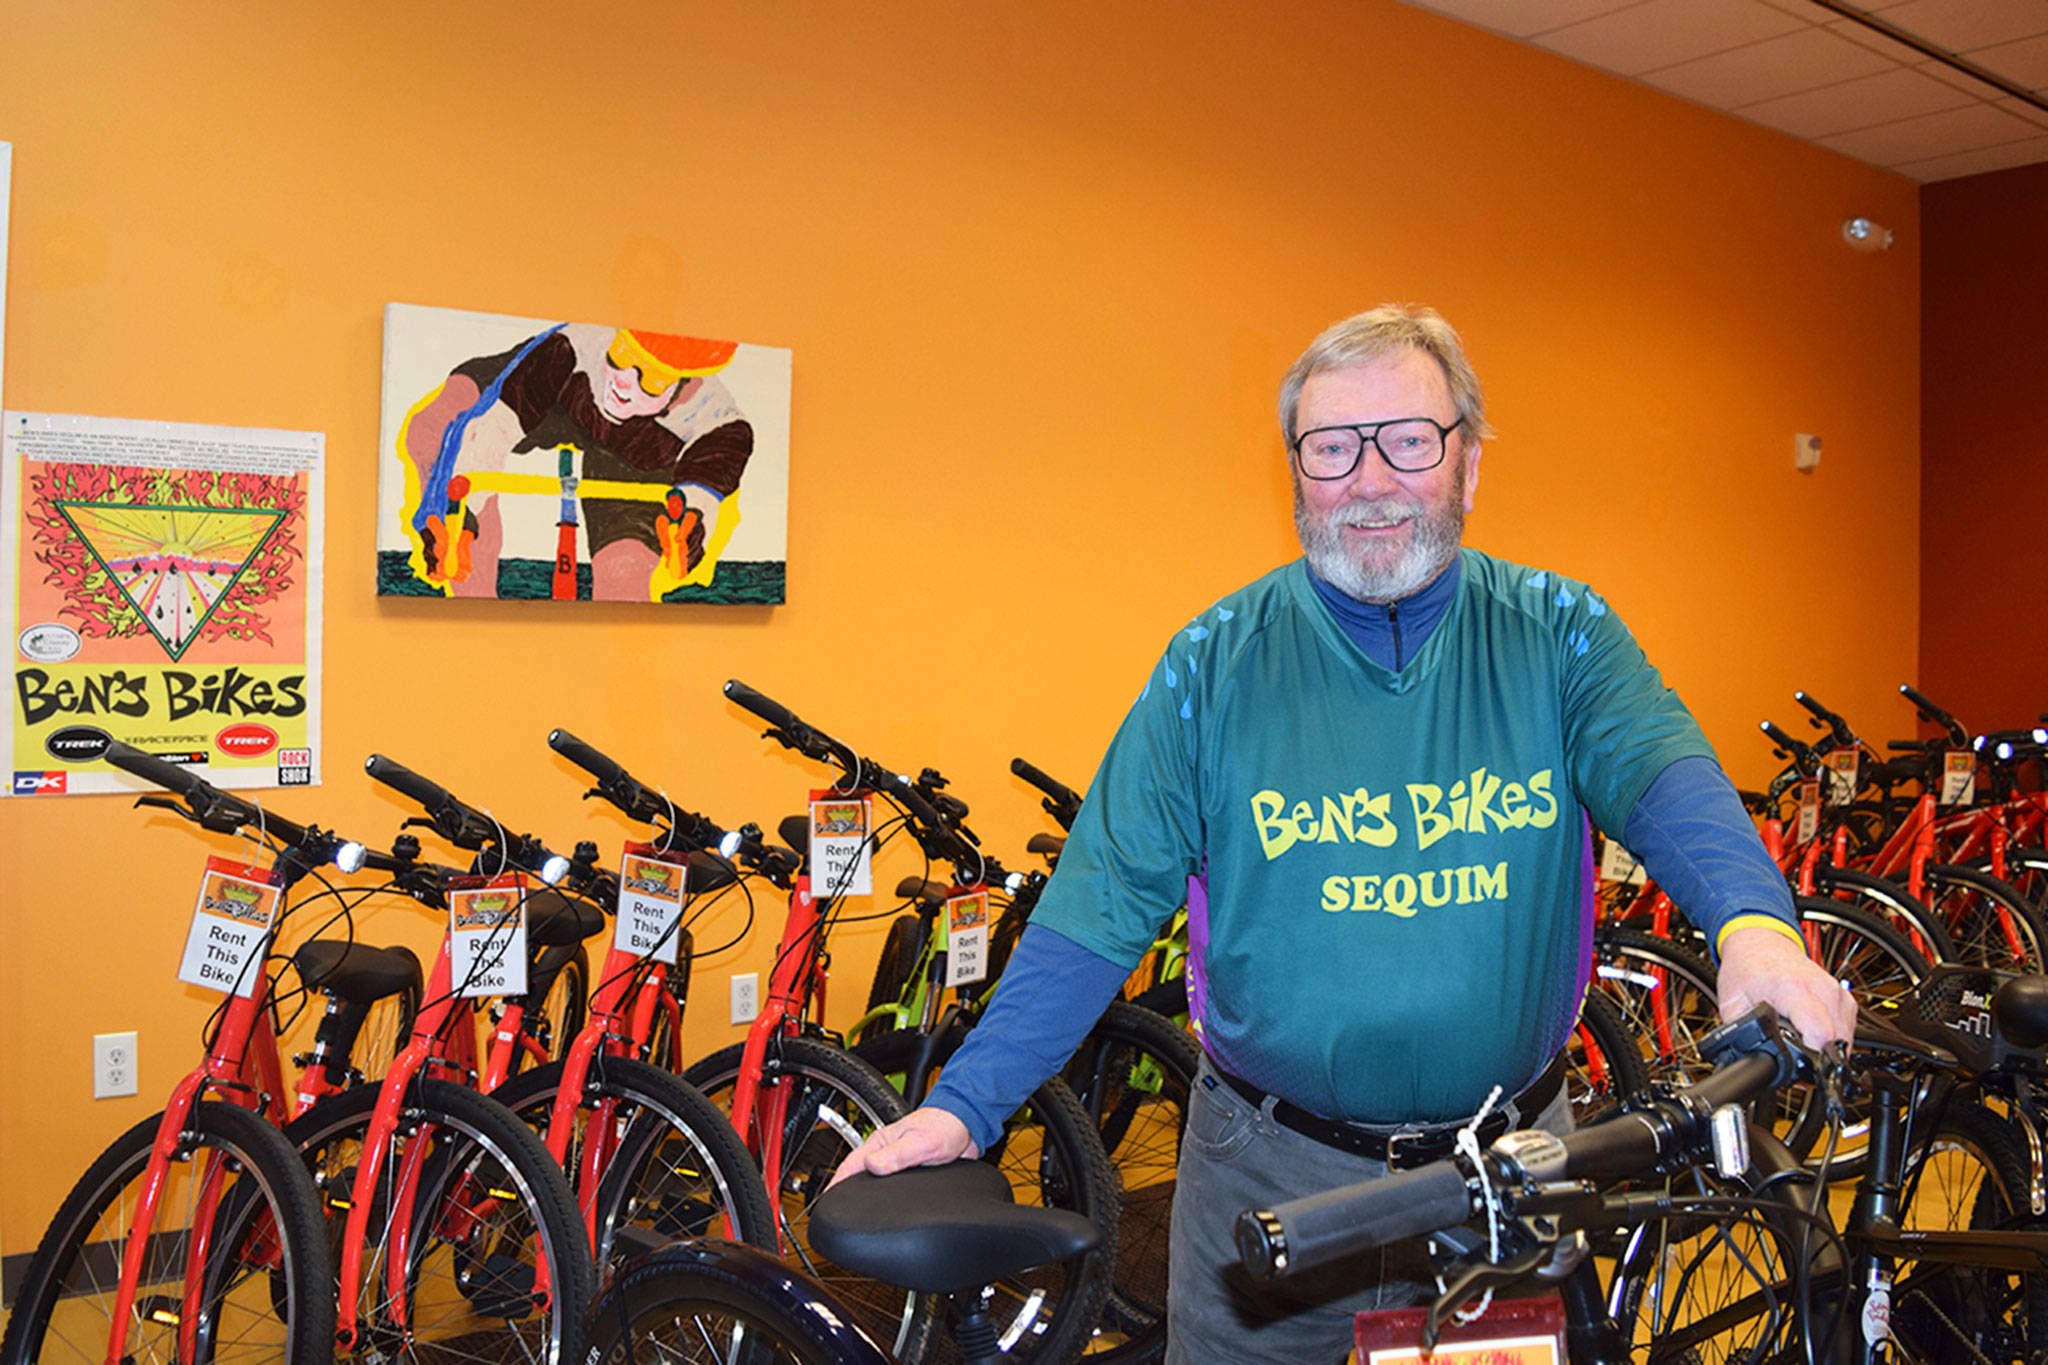 Sam Chandler, owner of Ben’s Bikes in Sequim, stands with a fleet of bikes in Fit4Life Studio’s previous space at 1245 W. Washington St. where the business plans to expand its products and services. Sequim Gazette photo by Erin Hawkins